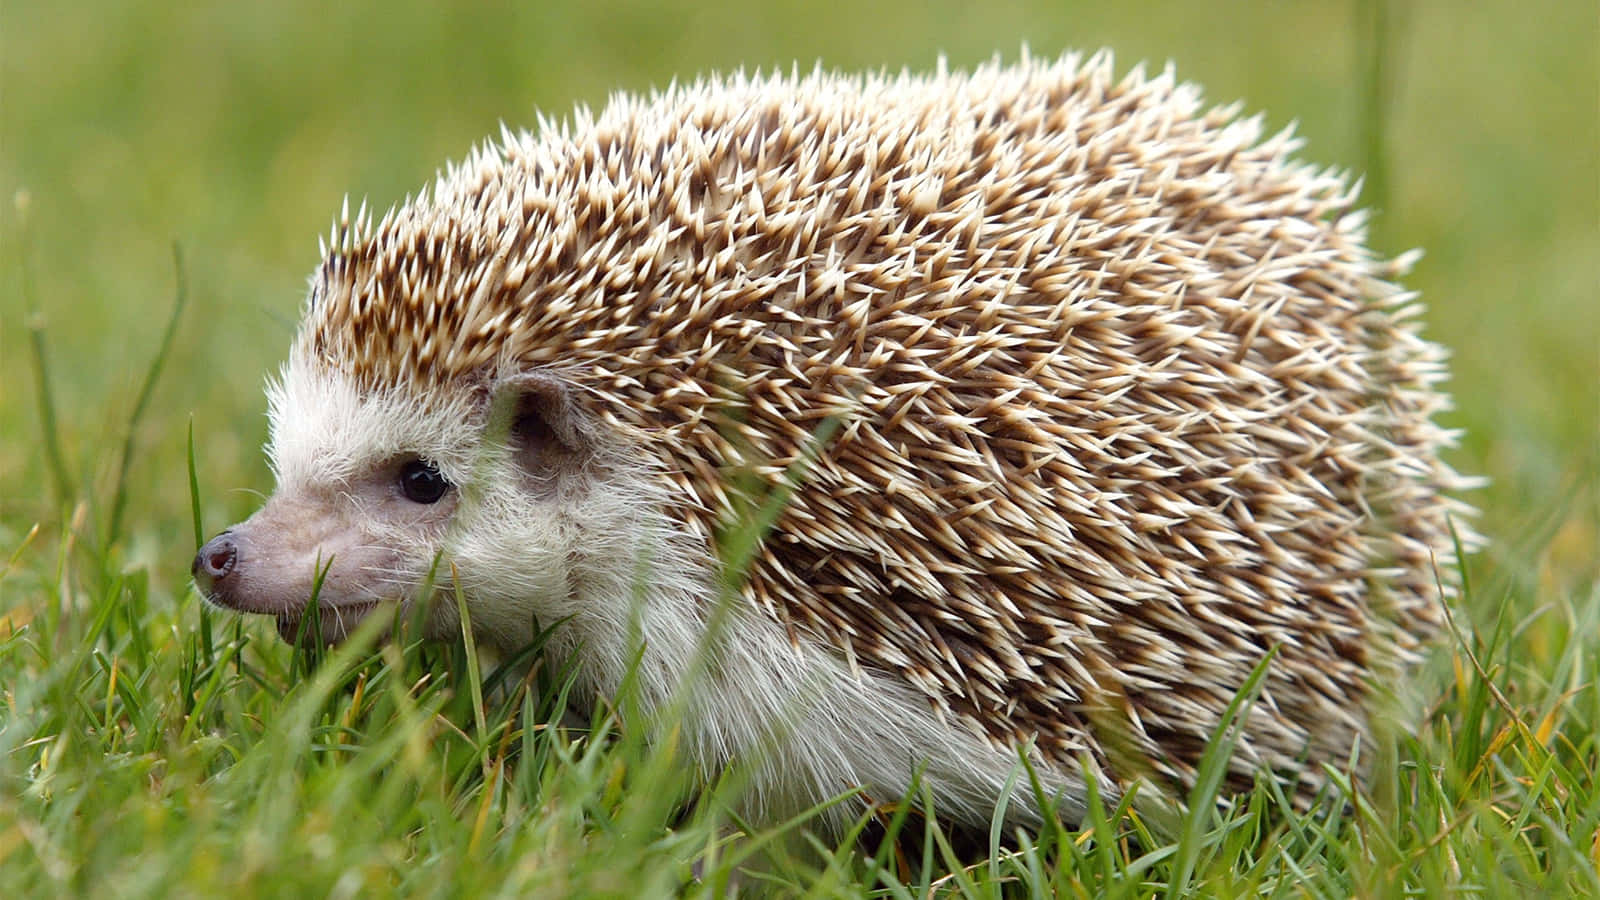 Cute Hedgehog Lying On Grass Field Picture